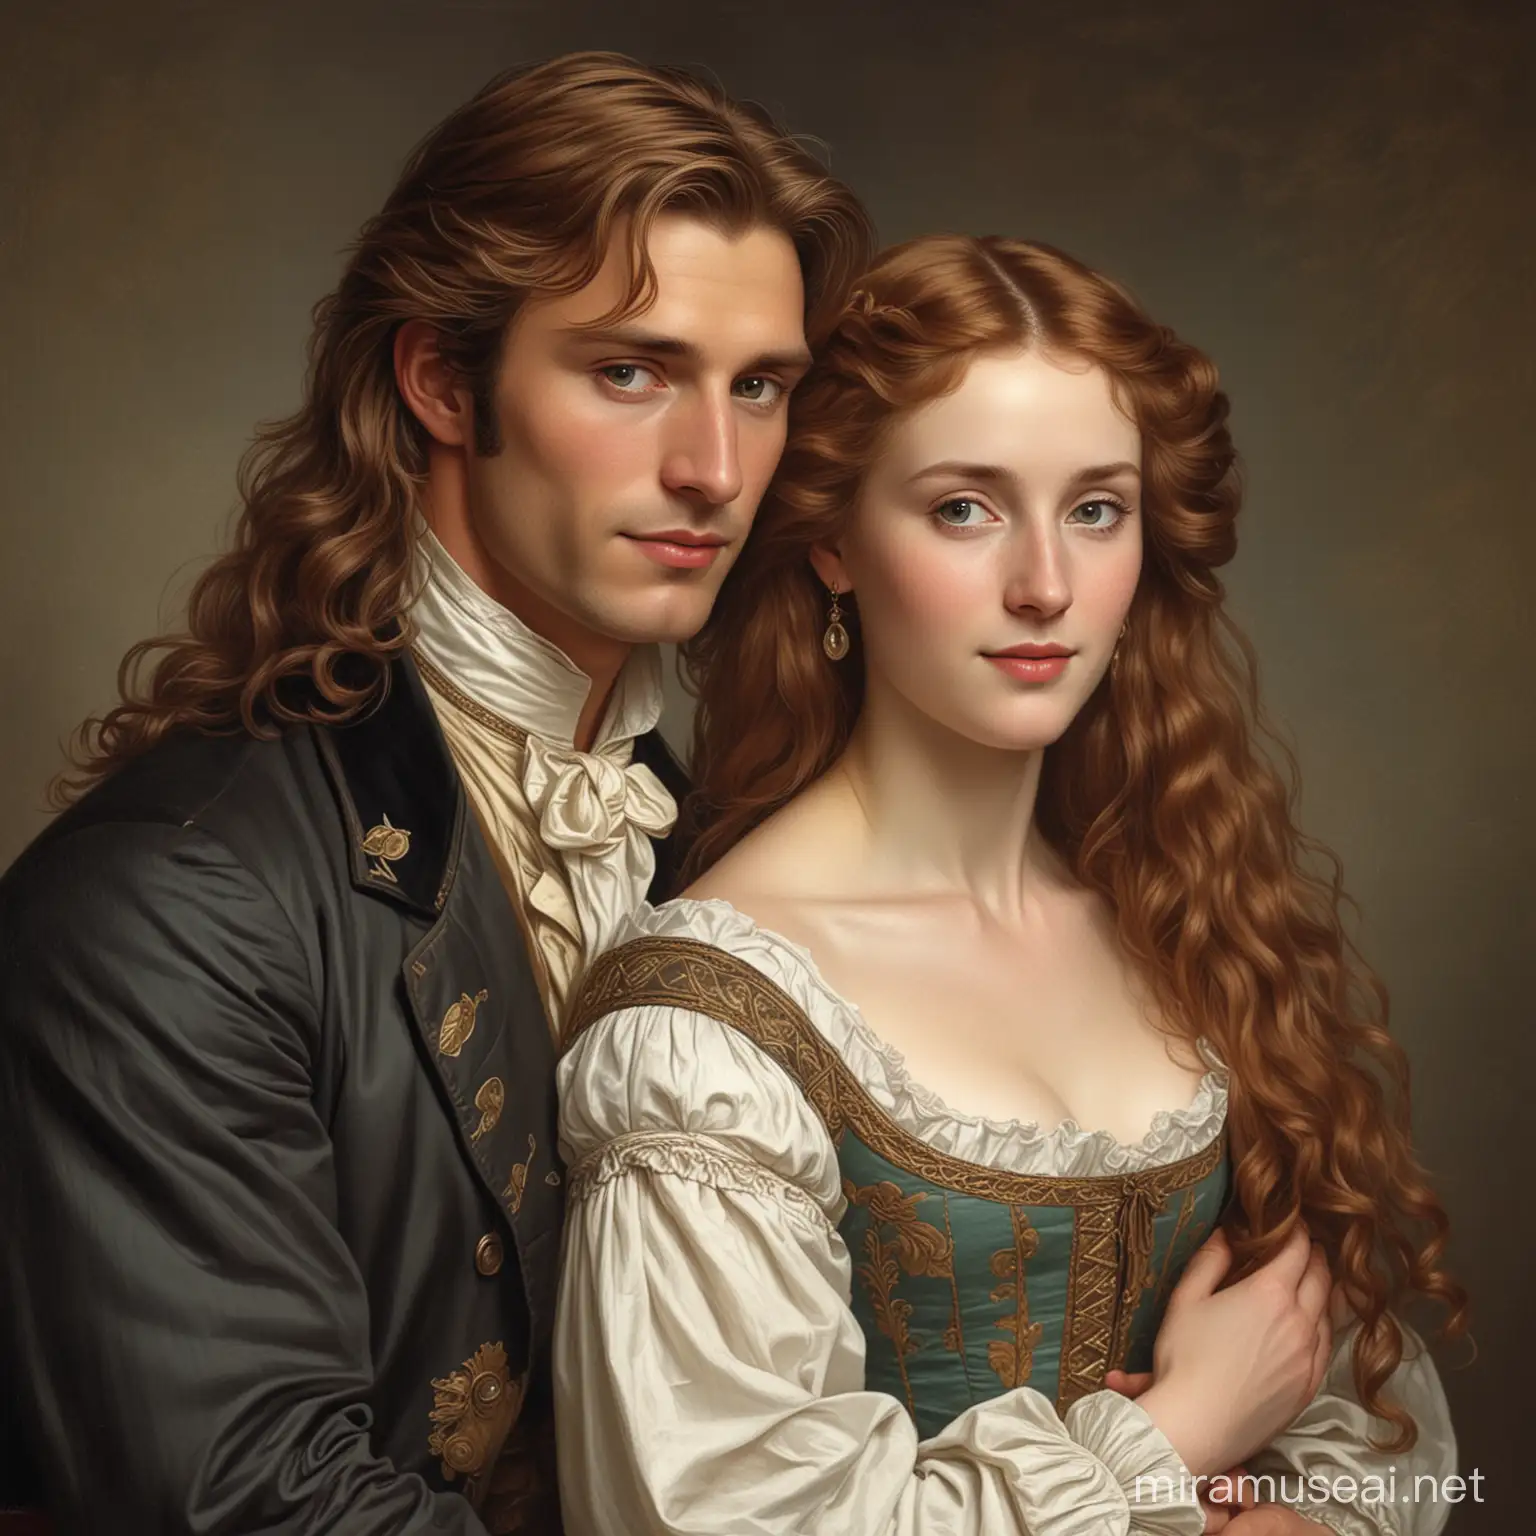 Elegant Couple Embraced Noble Man and Beautiful Woman from the 1840s